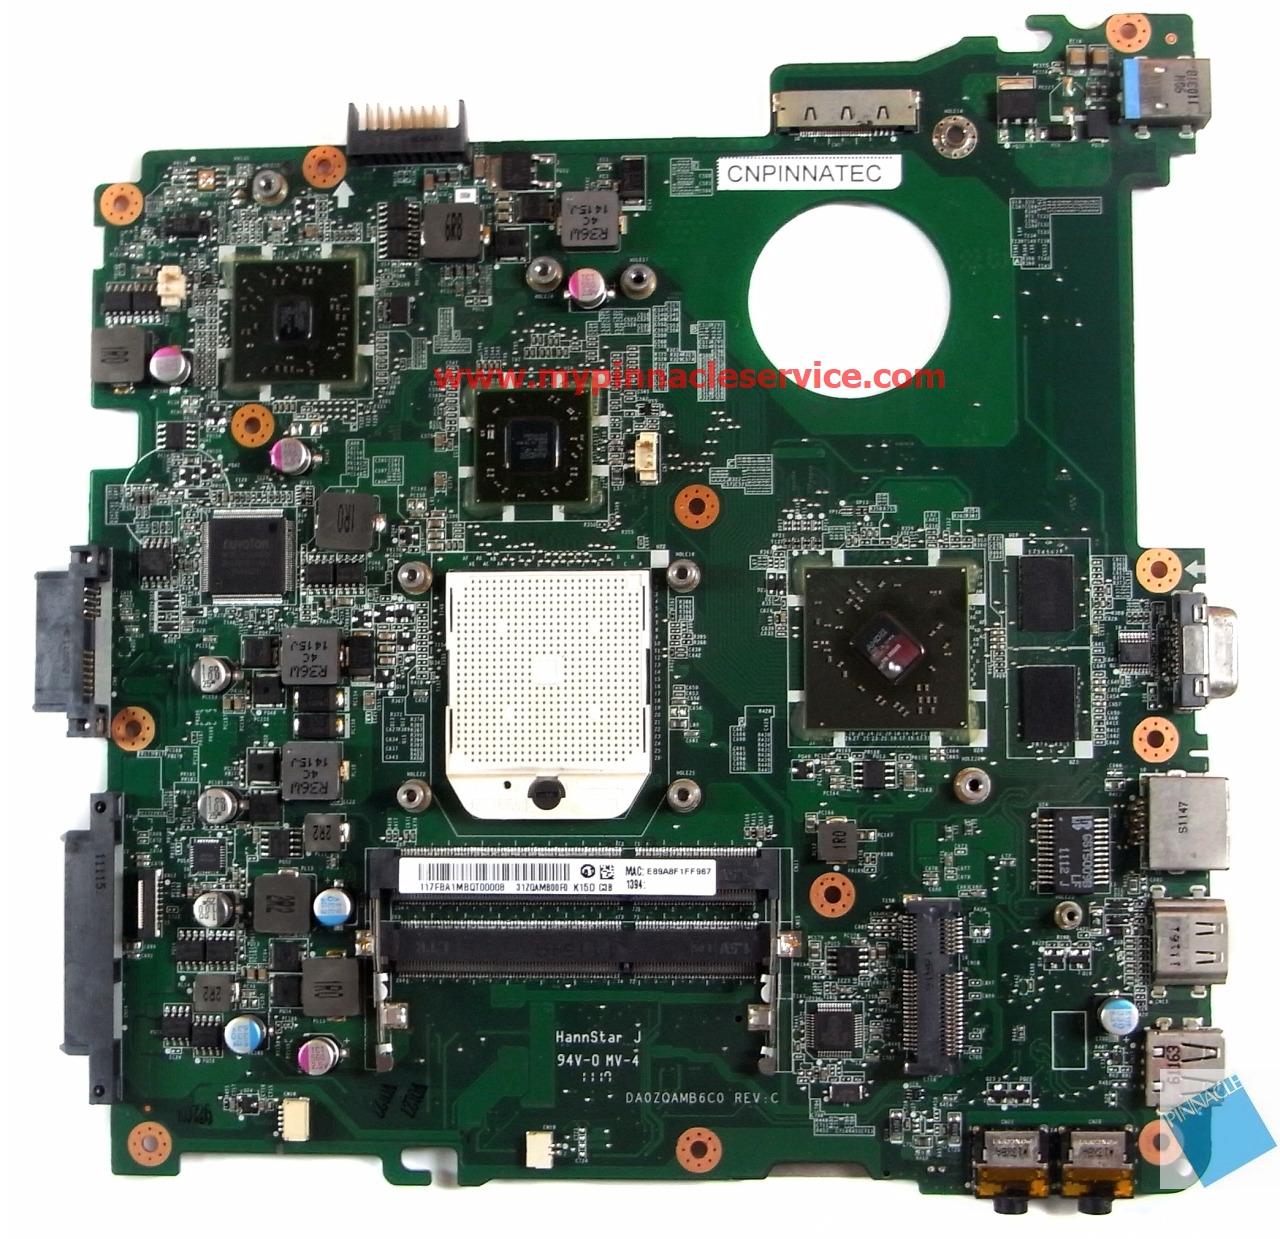 mbrp706001-motherboard-for-acer-aspire-4552g-da0zqamb6c0-31zqamb00f0-rimg0097.jpg